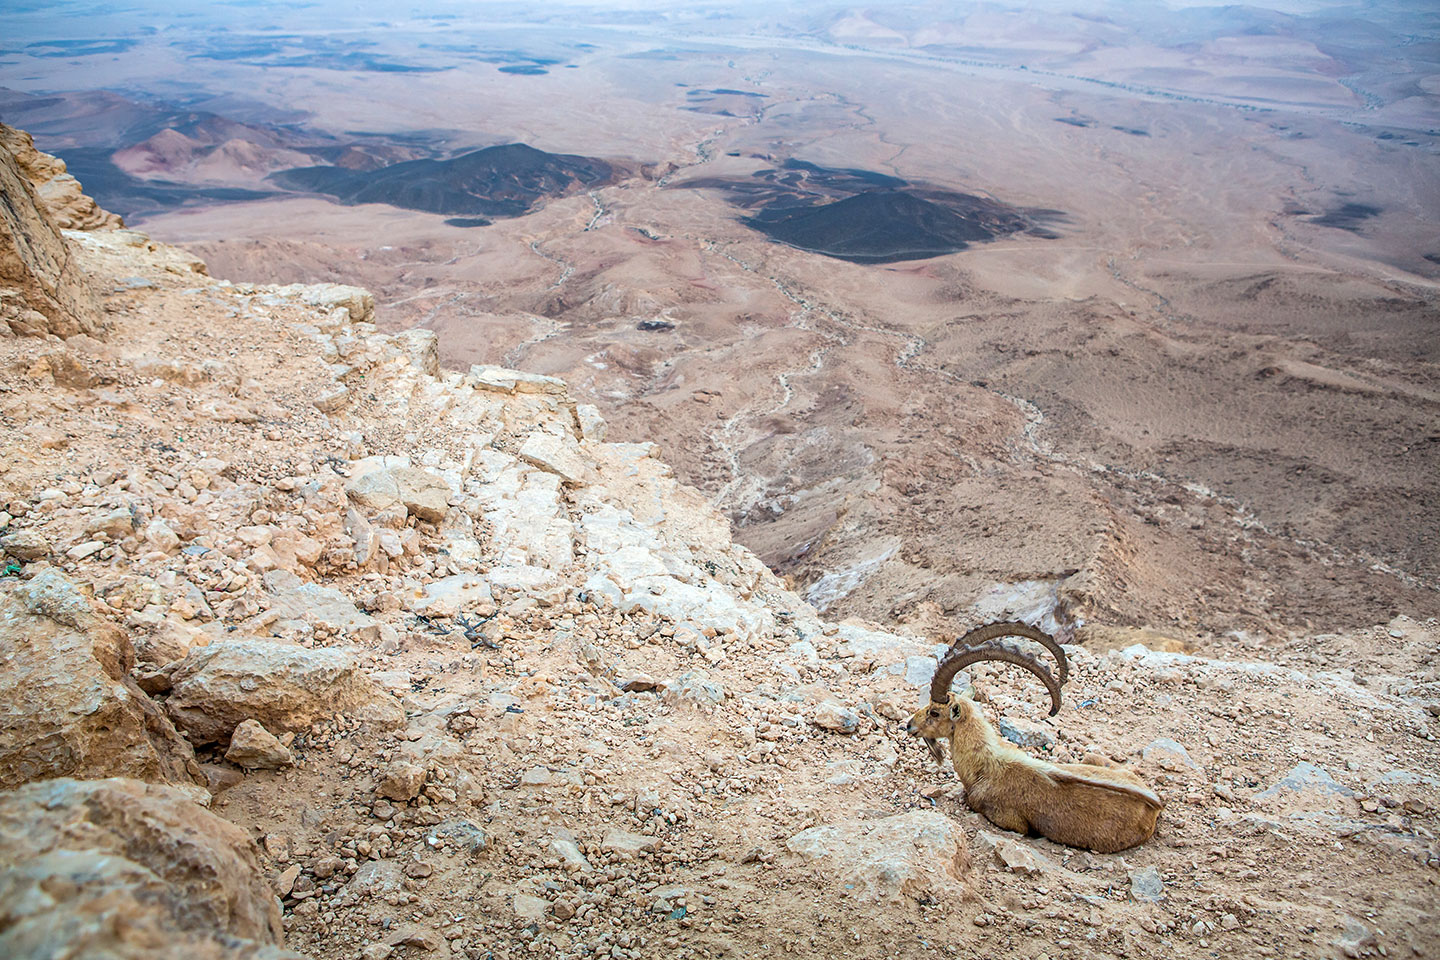 Mitzpe Ramon crater and cliffs, Israel